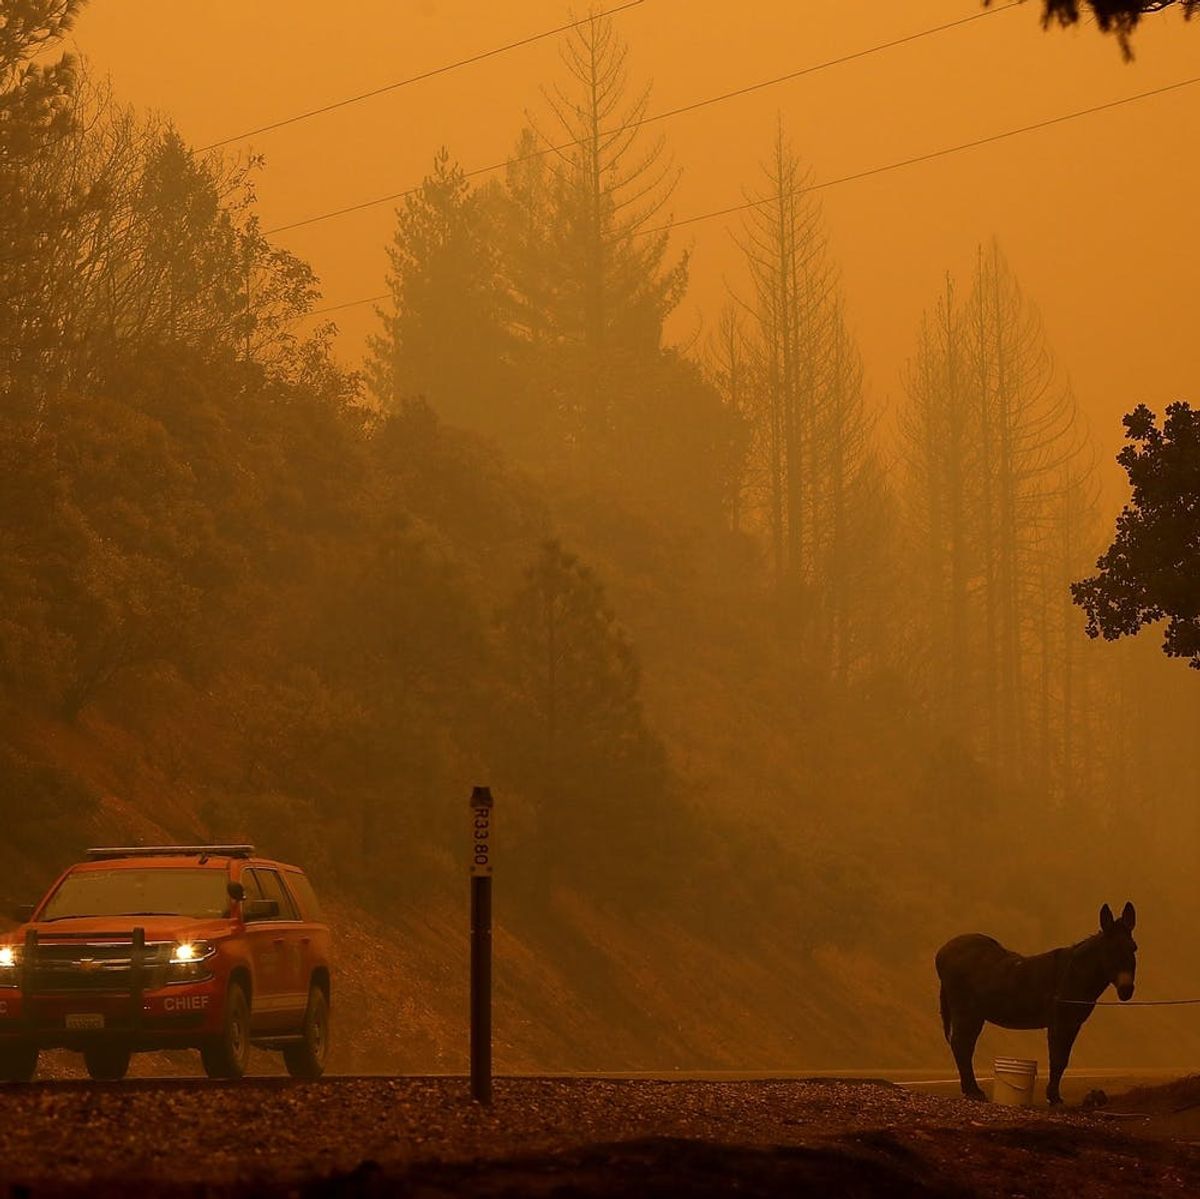 People Are Doing Everything They Can to Evacuate Animals from Devastating California Wildfires